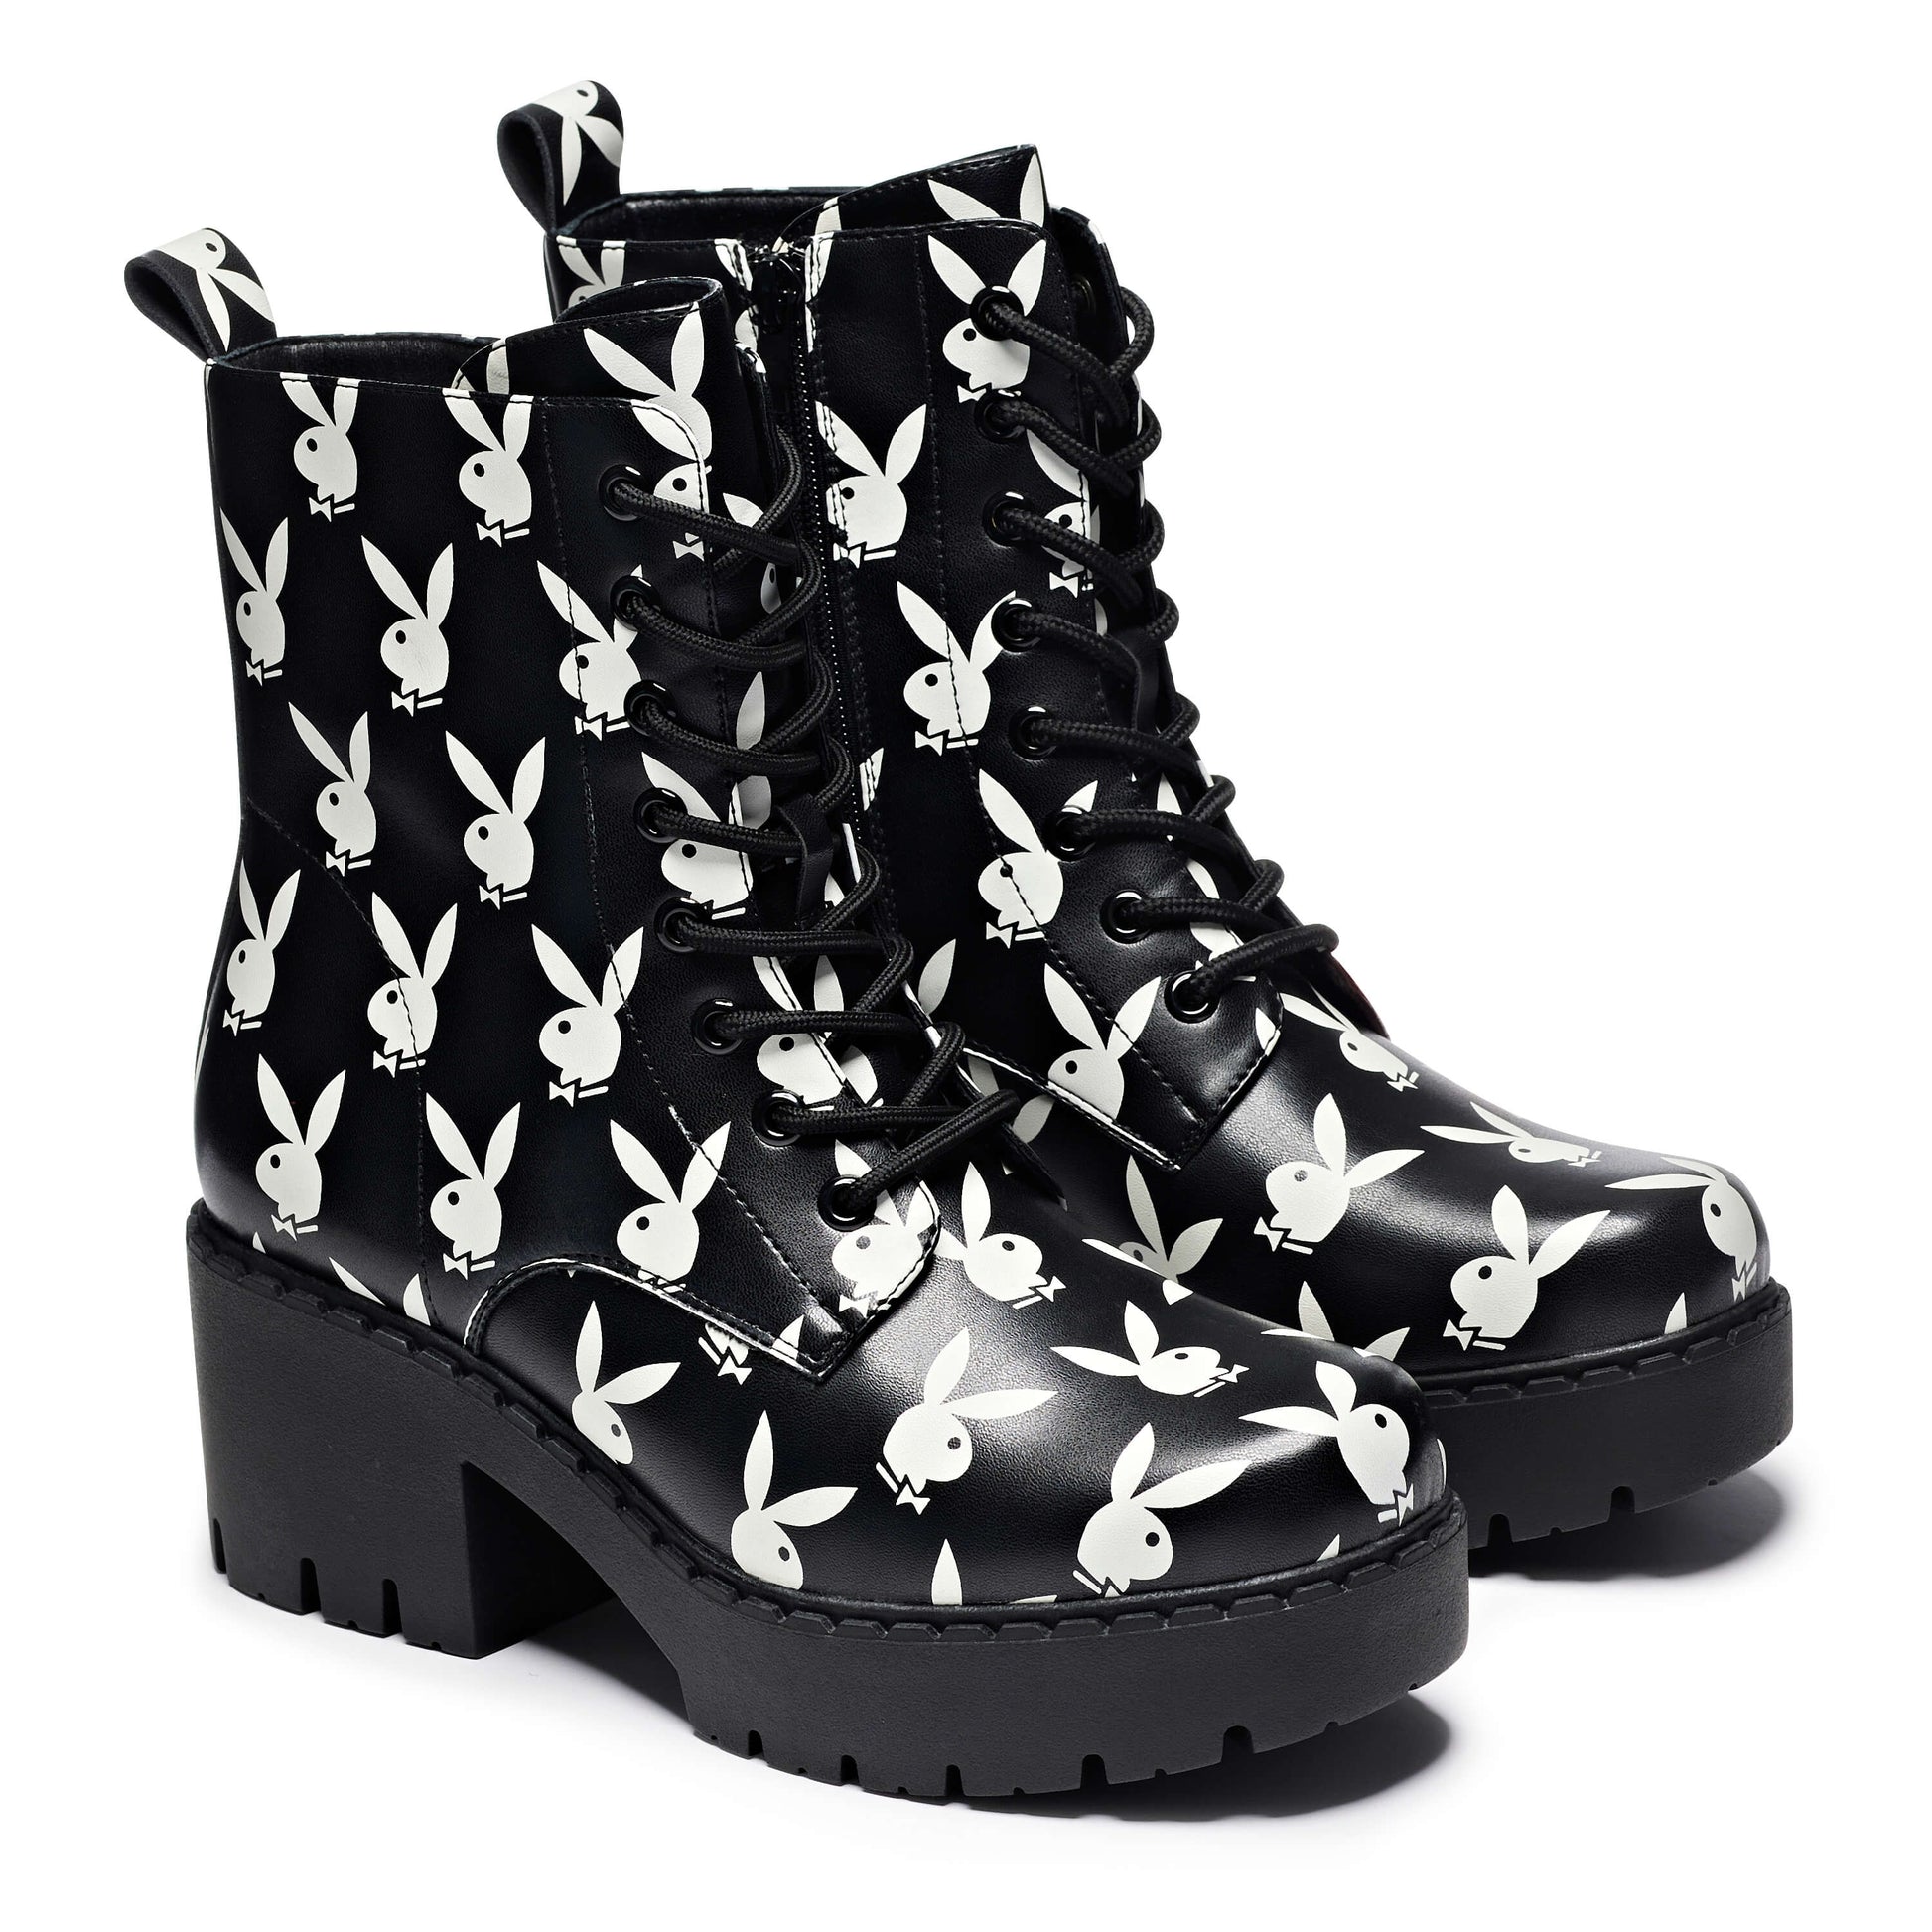 Playboy Reprise White Switch Boots - Ankle Boots - KOI Footwear - Black - Three-Quarter View